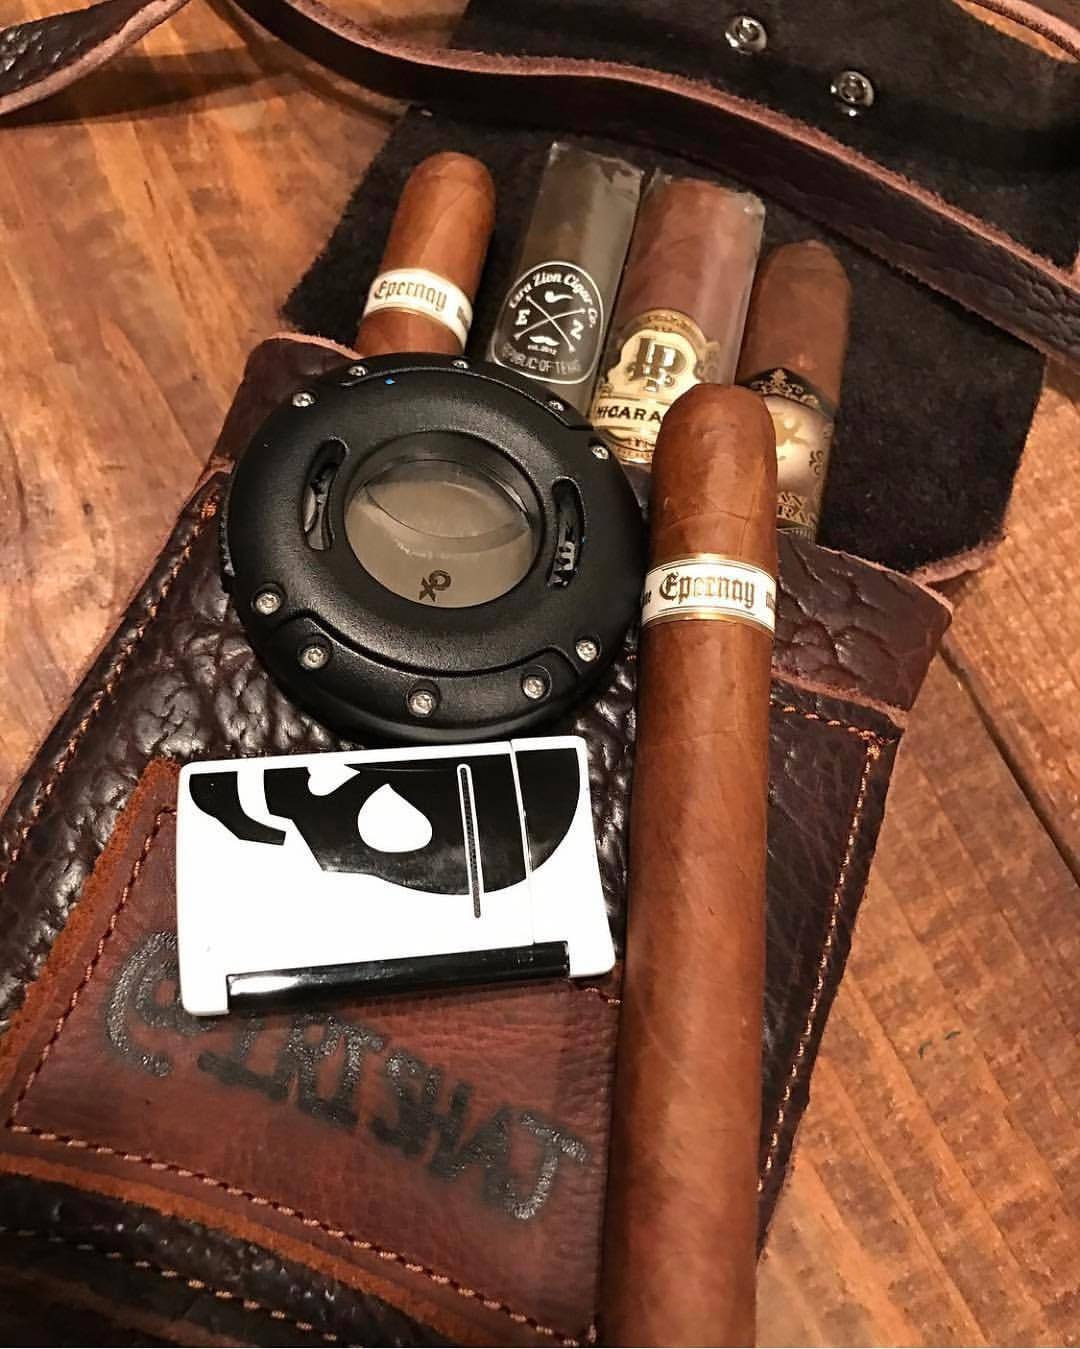 Legendary Saxon American bison leather cigar carrier. 🔥💨 Cut from the best bison leather I can find. #madeinusa ⚒⚒ #originaldesign #ruggedluxury #veteranmade Repost from @irishaj I cannot tell you badass this cigar carrier is from @legendarysaxon,...